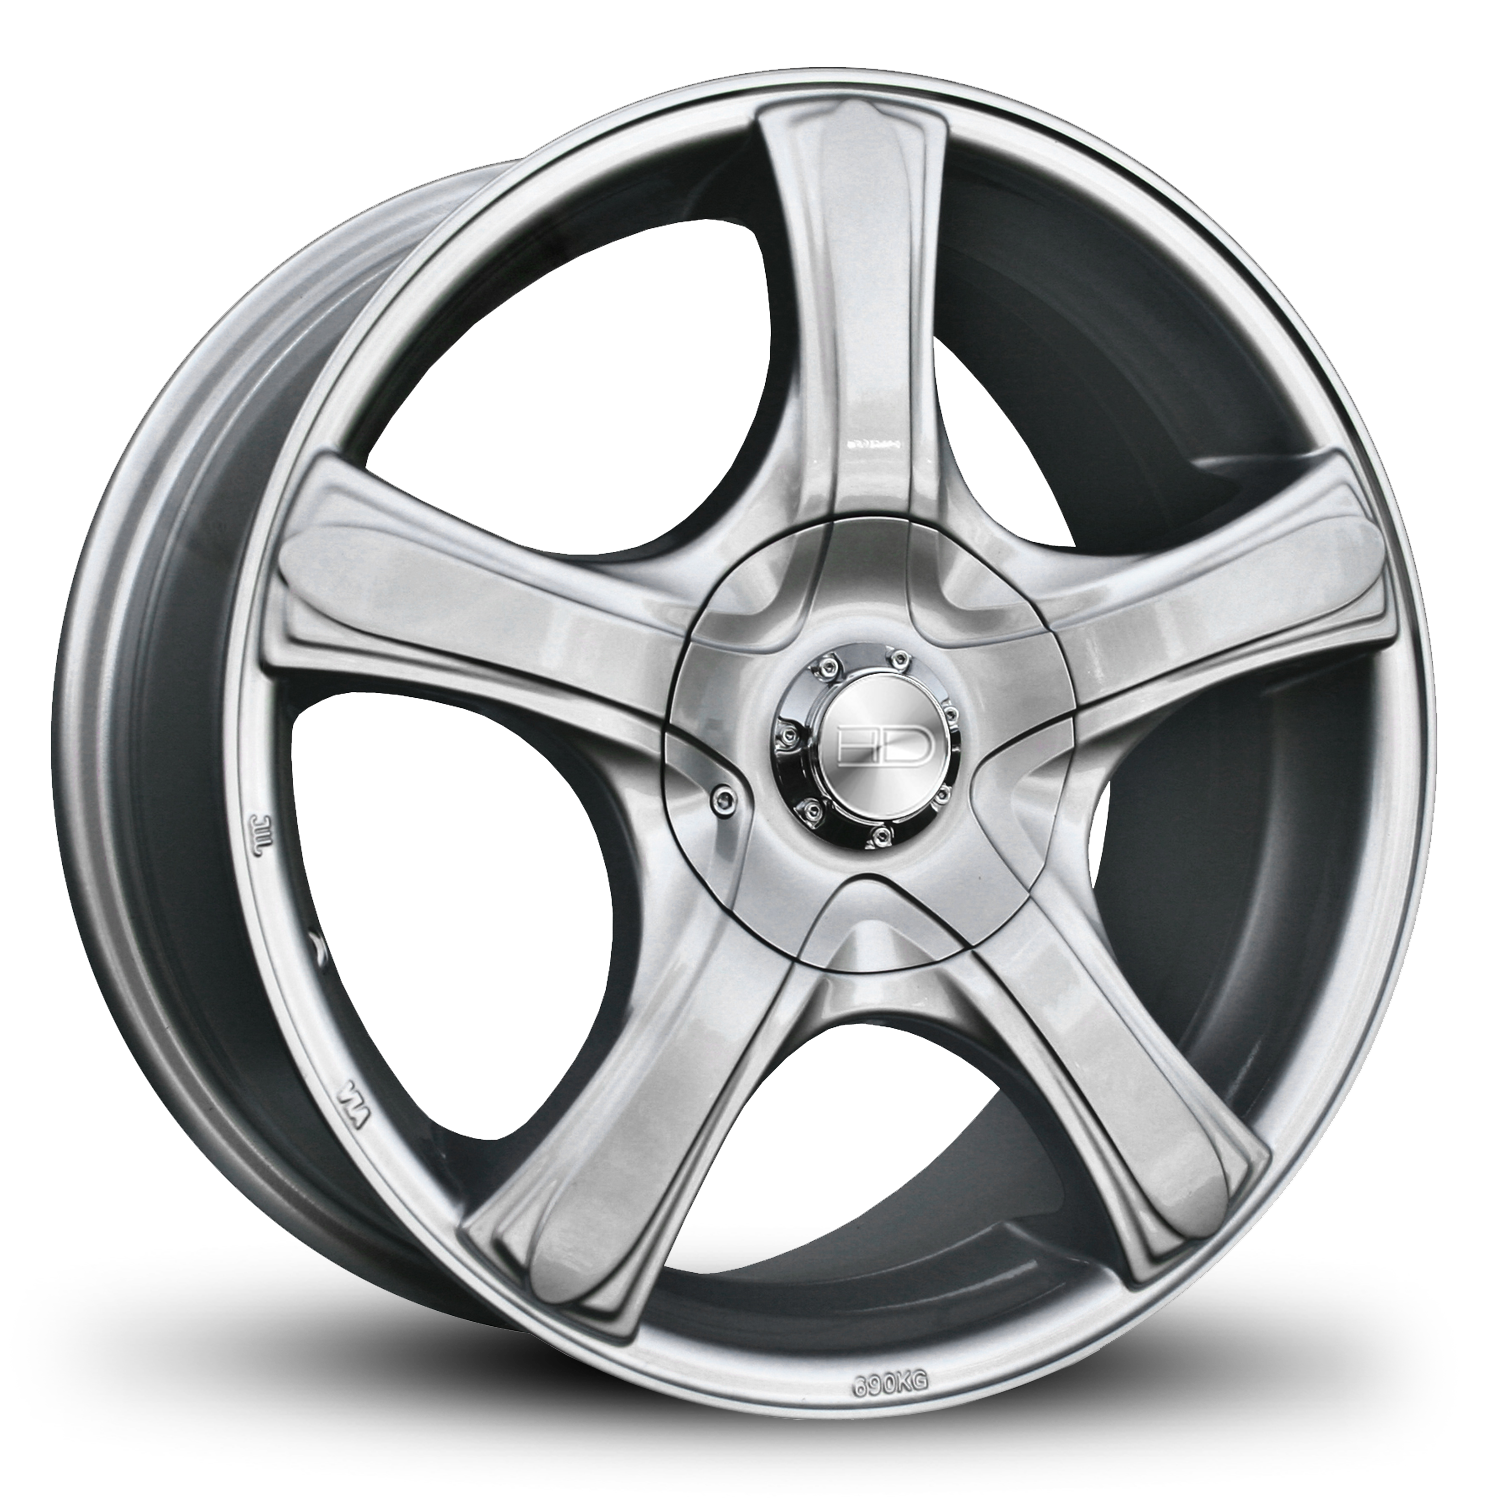 Buy Replacement Center Caps for the HD Wheels Storm 5 Storm V Wheel Rims